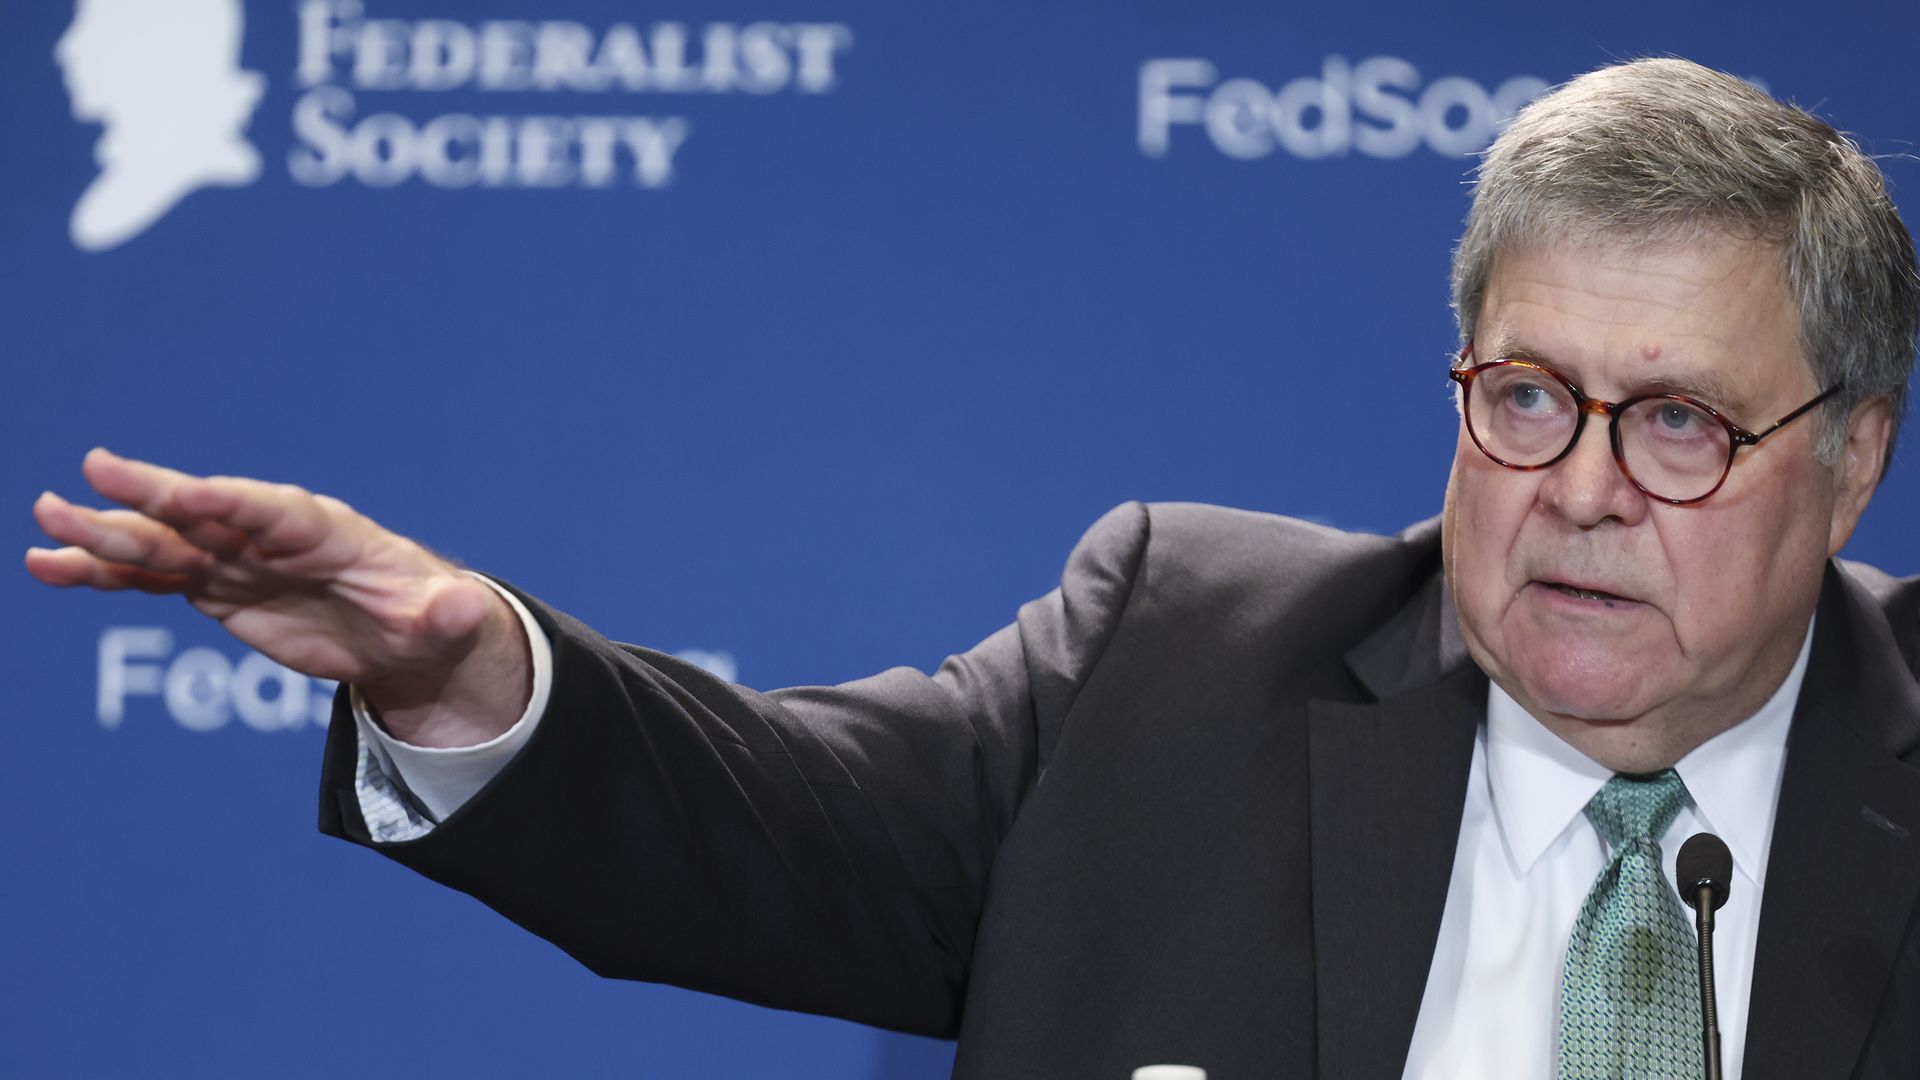 Former U.S. Attorney General William Barr speaks at a meeting of the Federalist Society on September 20, 2022.